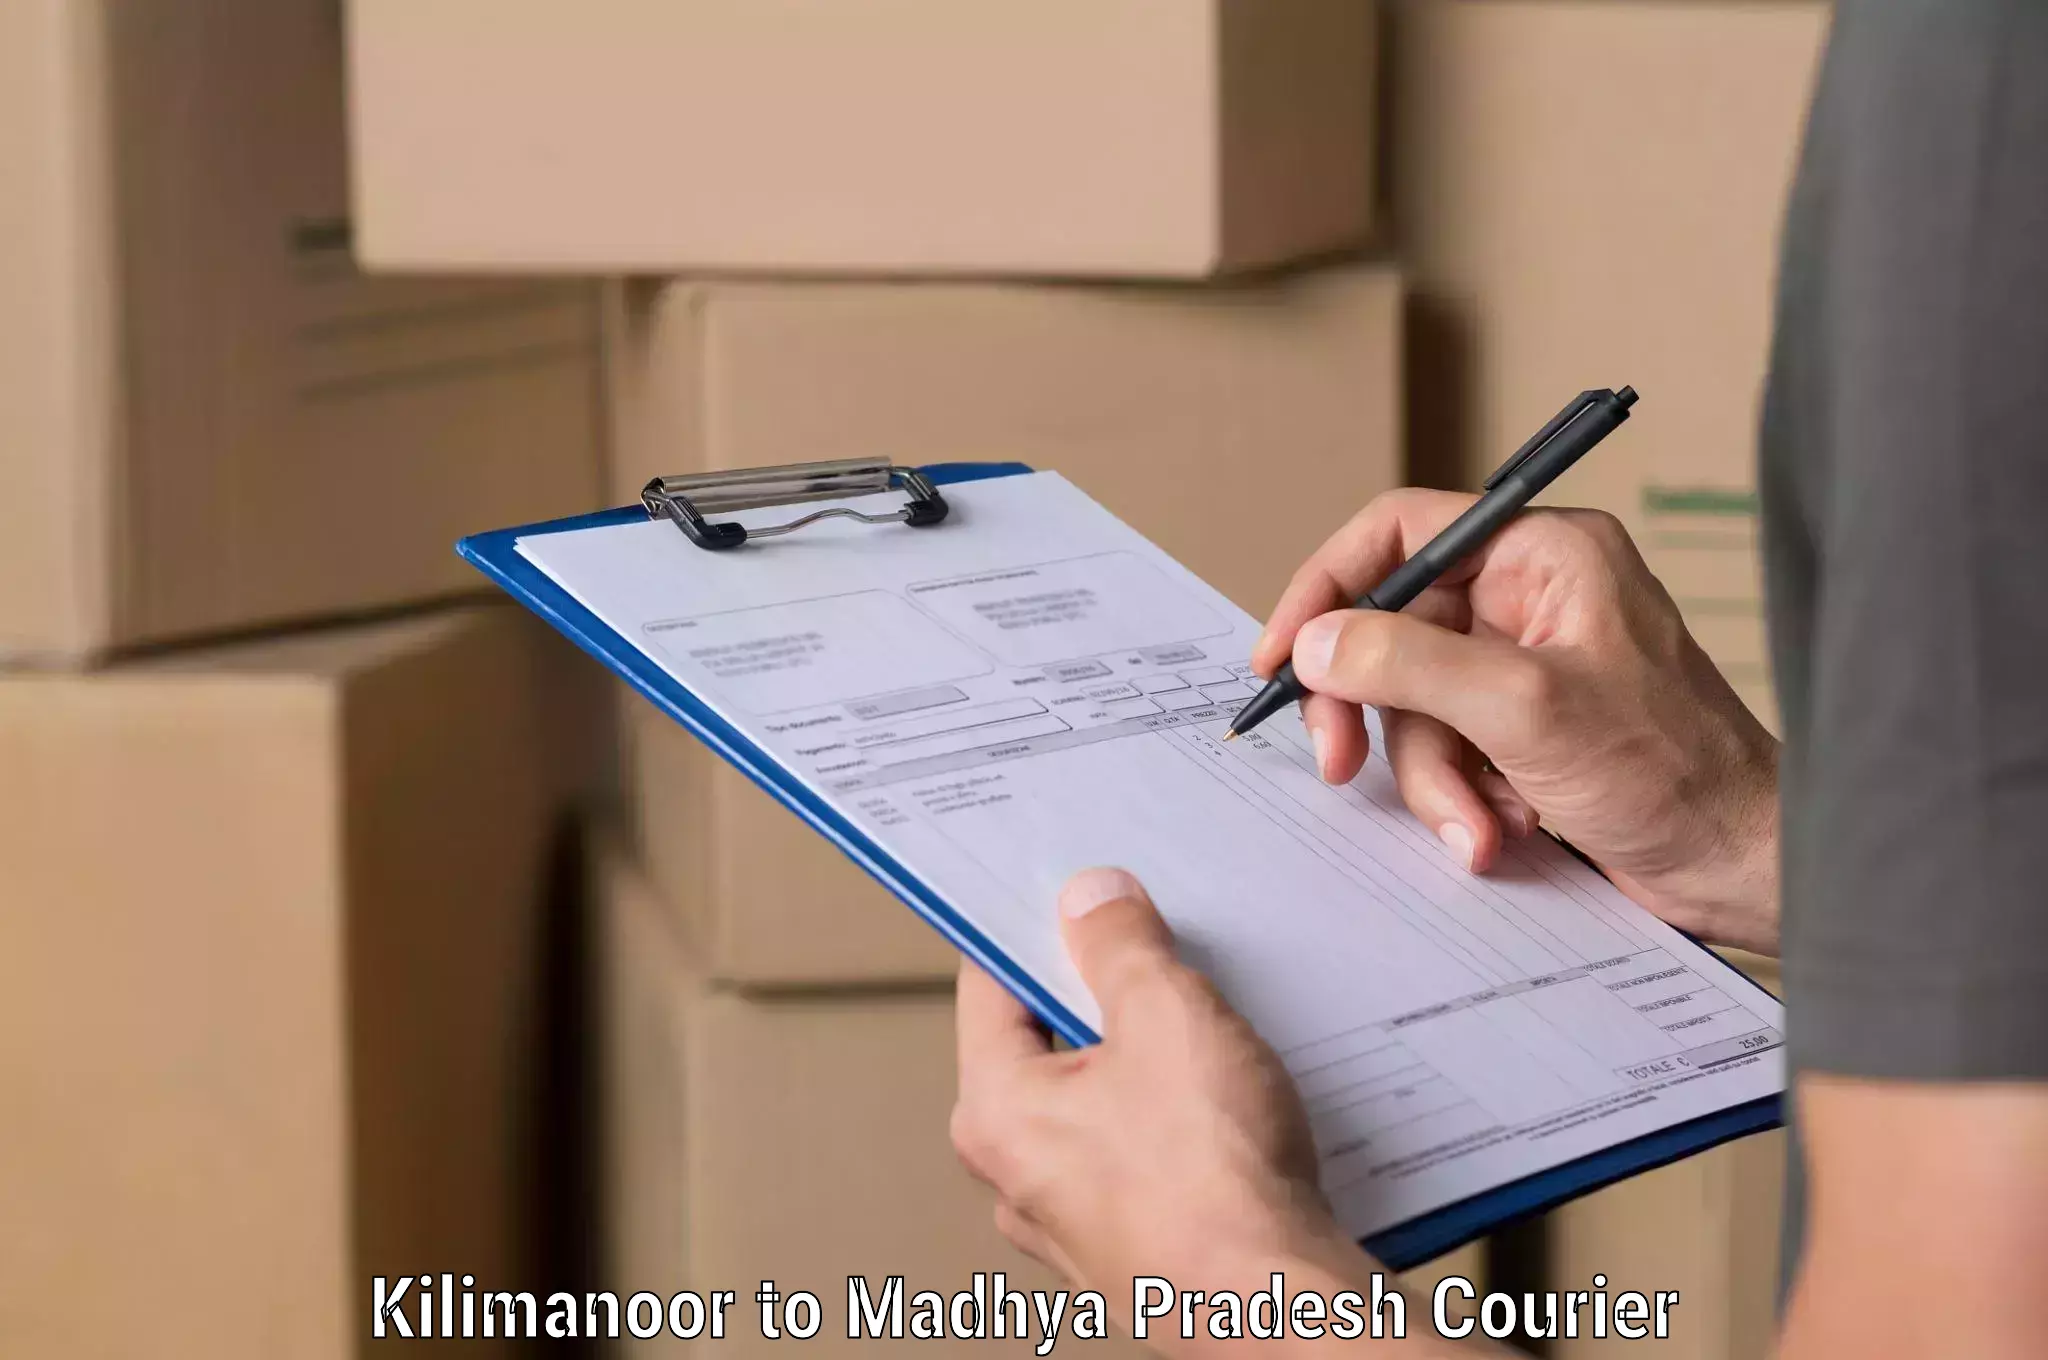 Fast shipping solutions Kilimanoor to Kotma